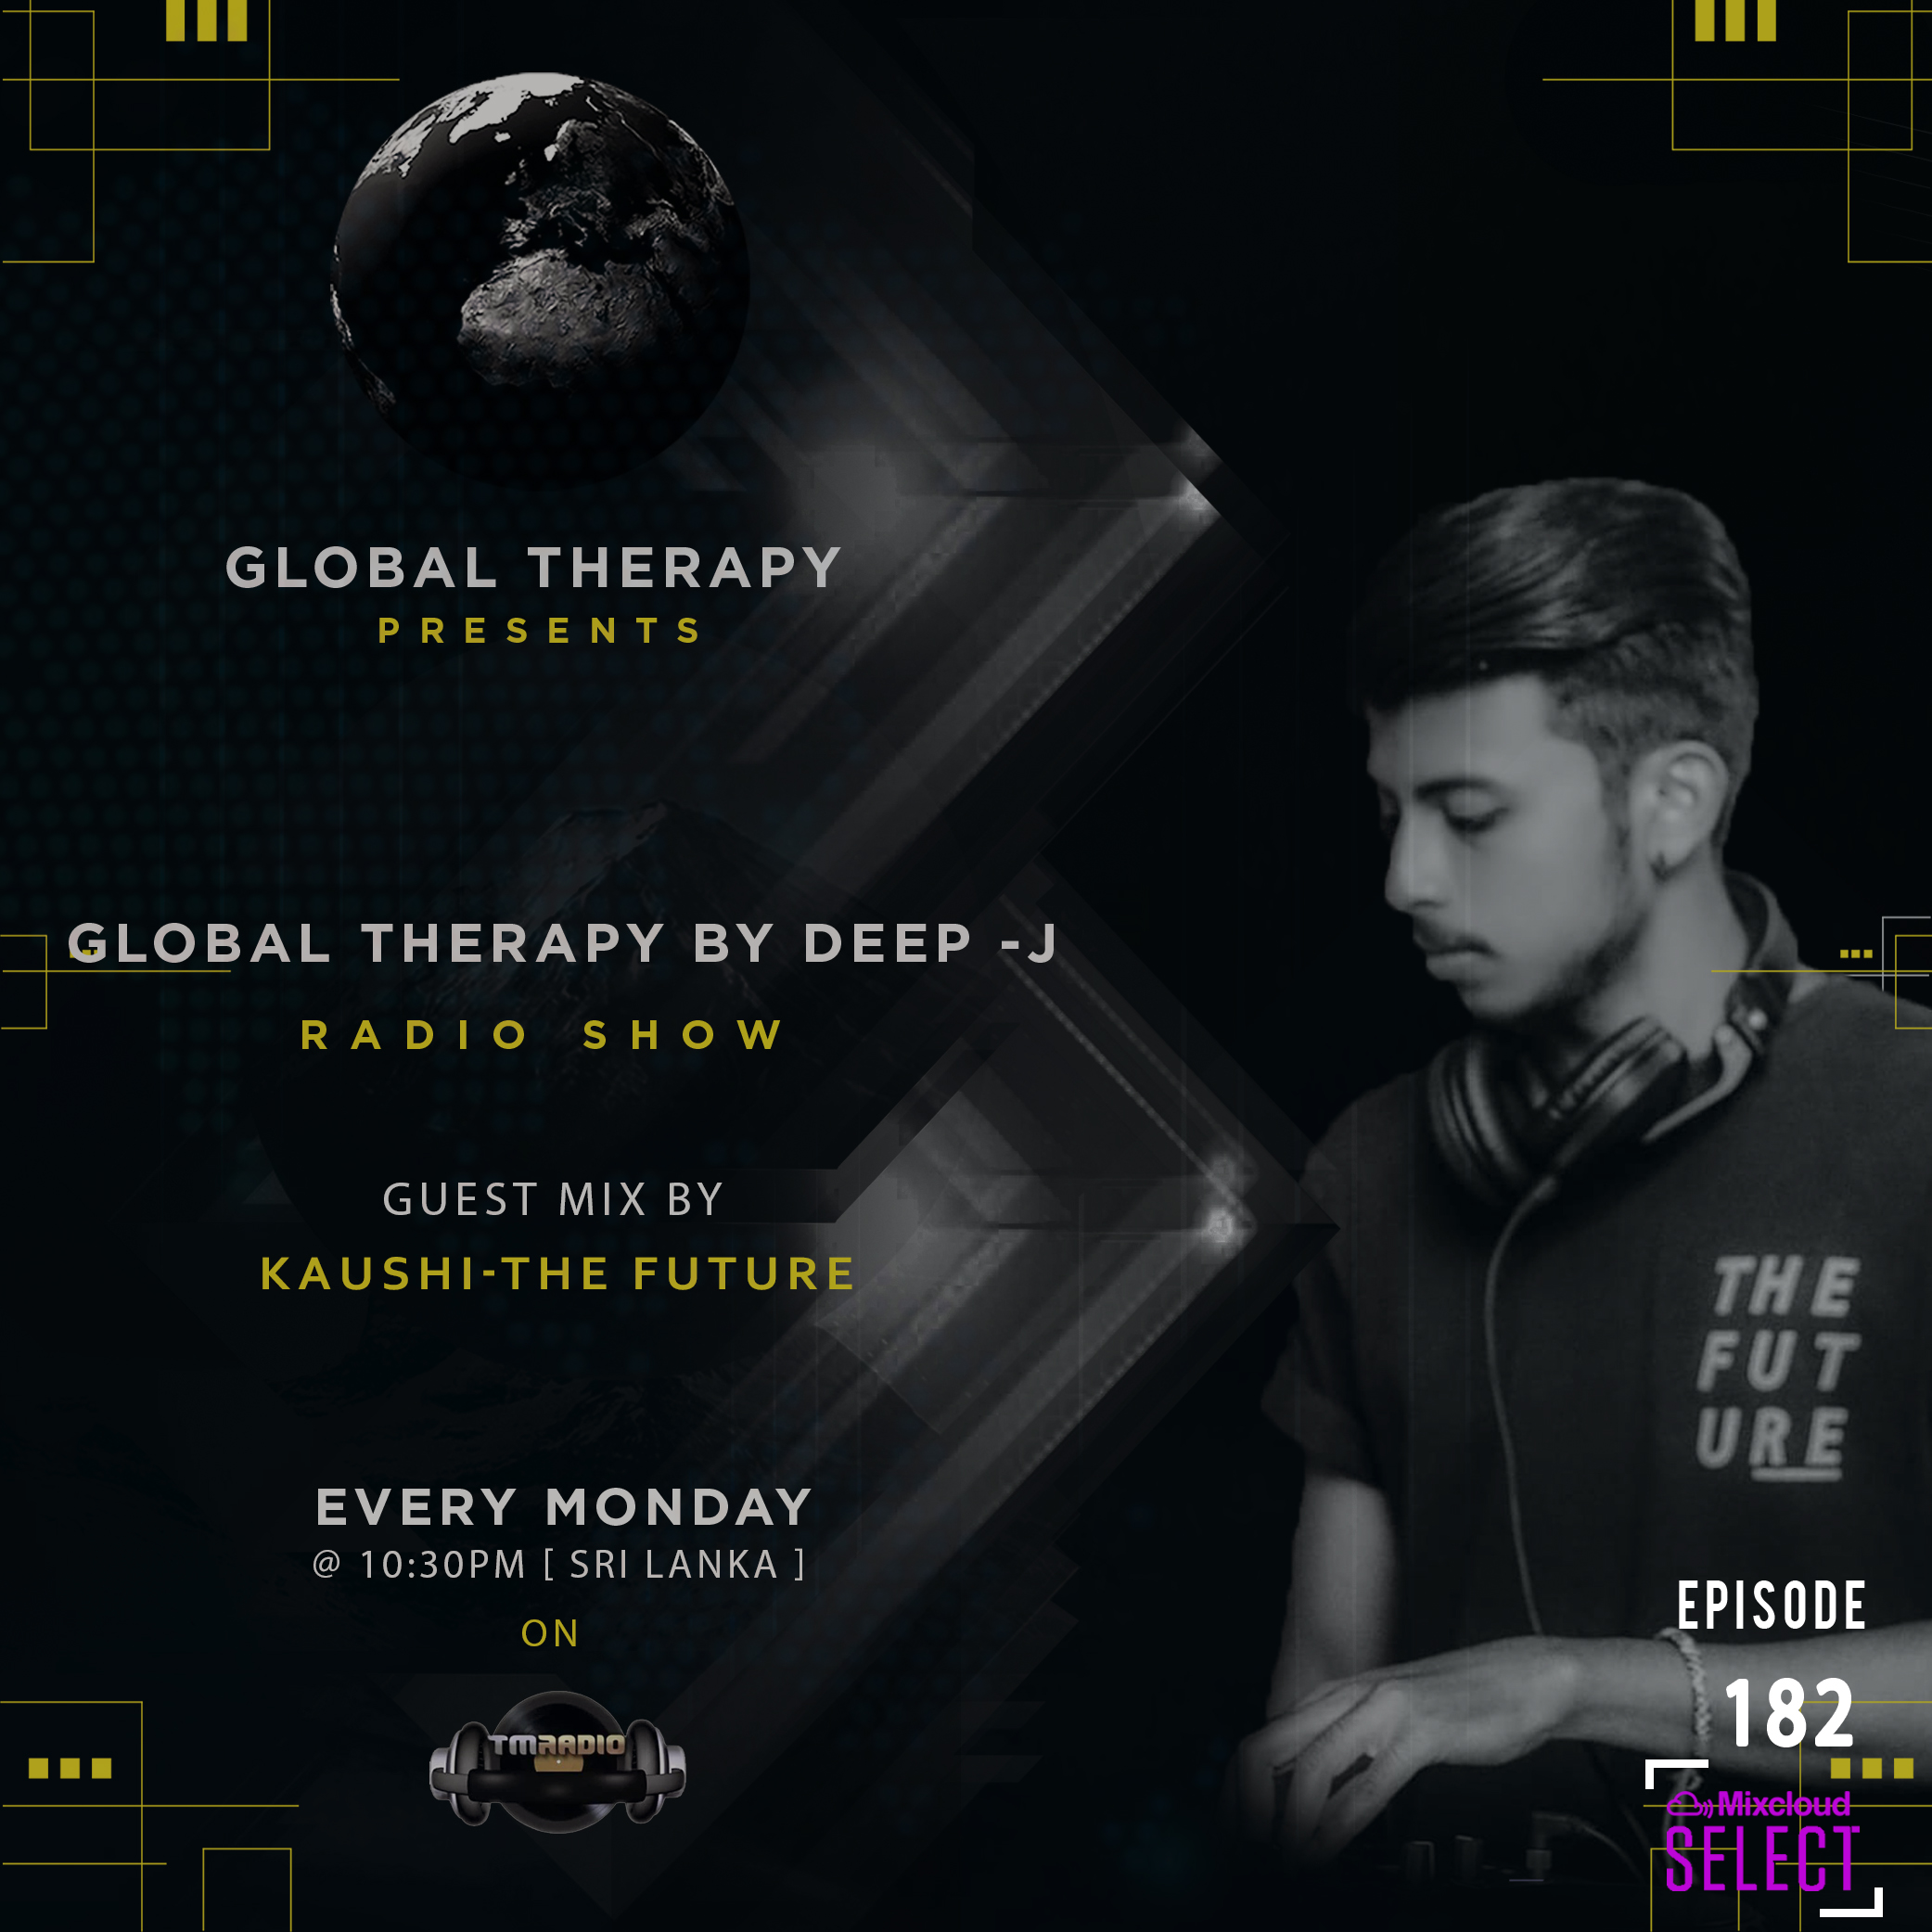 Global Therapy Episode 182 + Guest Mix By KAUSHI - THE FUTURE (from April 6th, 2020)